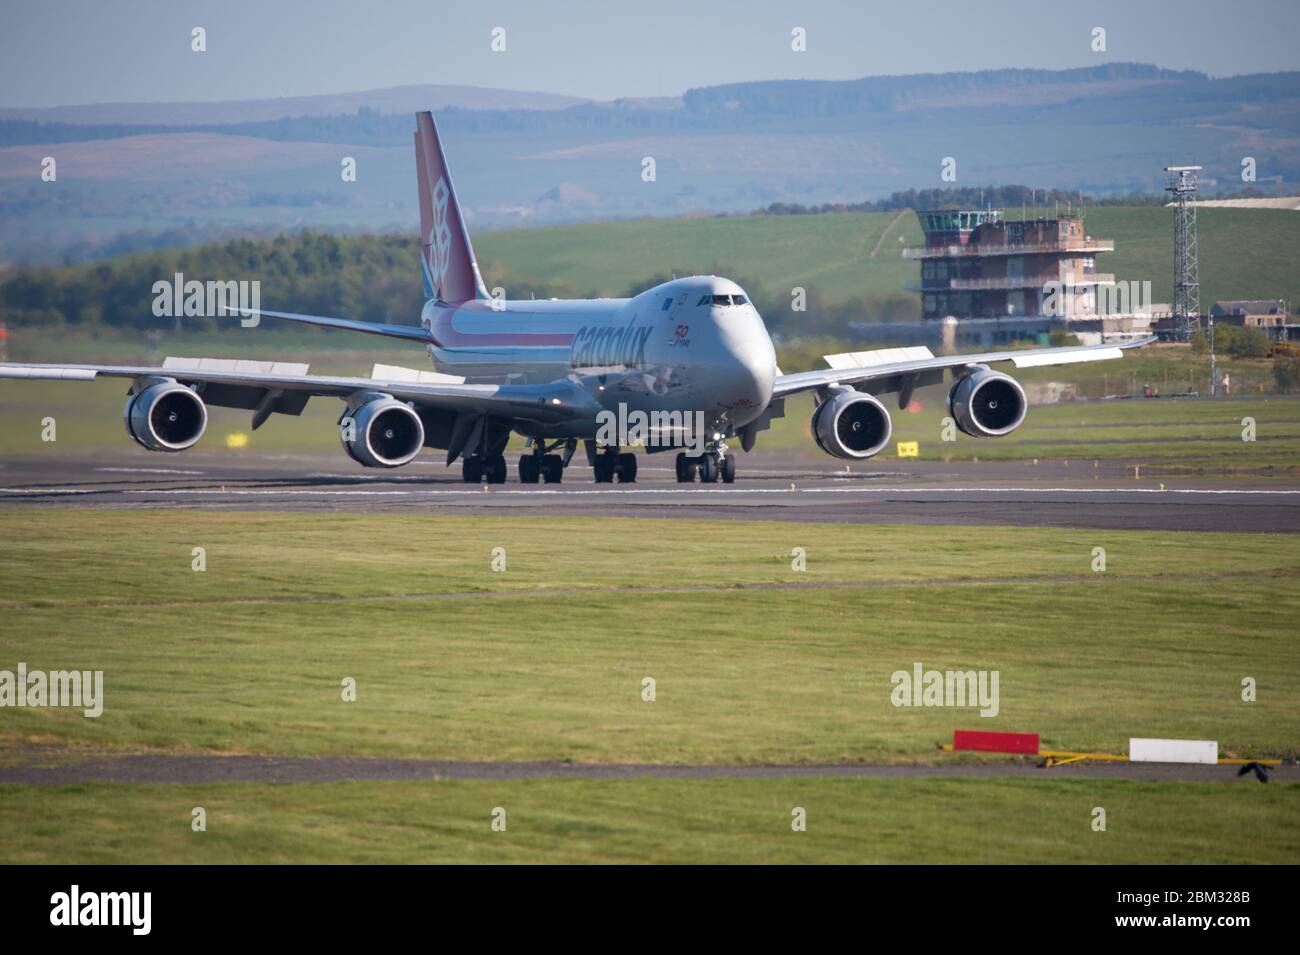 Prestwick, UK. 6th May, 2020. Pictured: A Cargolux Boeing 747-800 Freighter jumbo jet aircraft seen landing at Prestwick International Airport during the extended Coronavirus (COVID-19) Lockdown. Credit: Colin Fisher/Alamy Live News Stock Photo